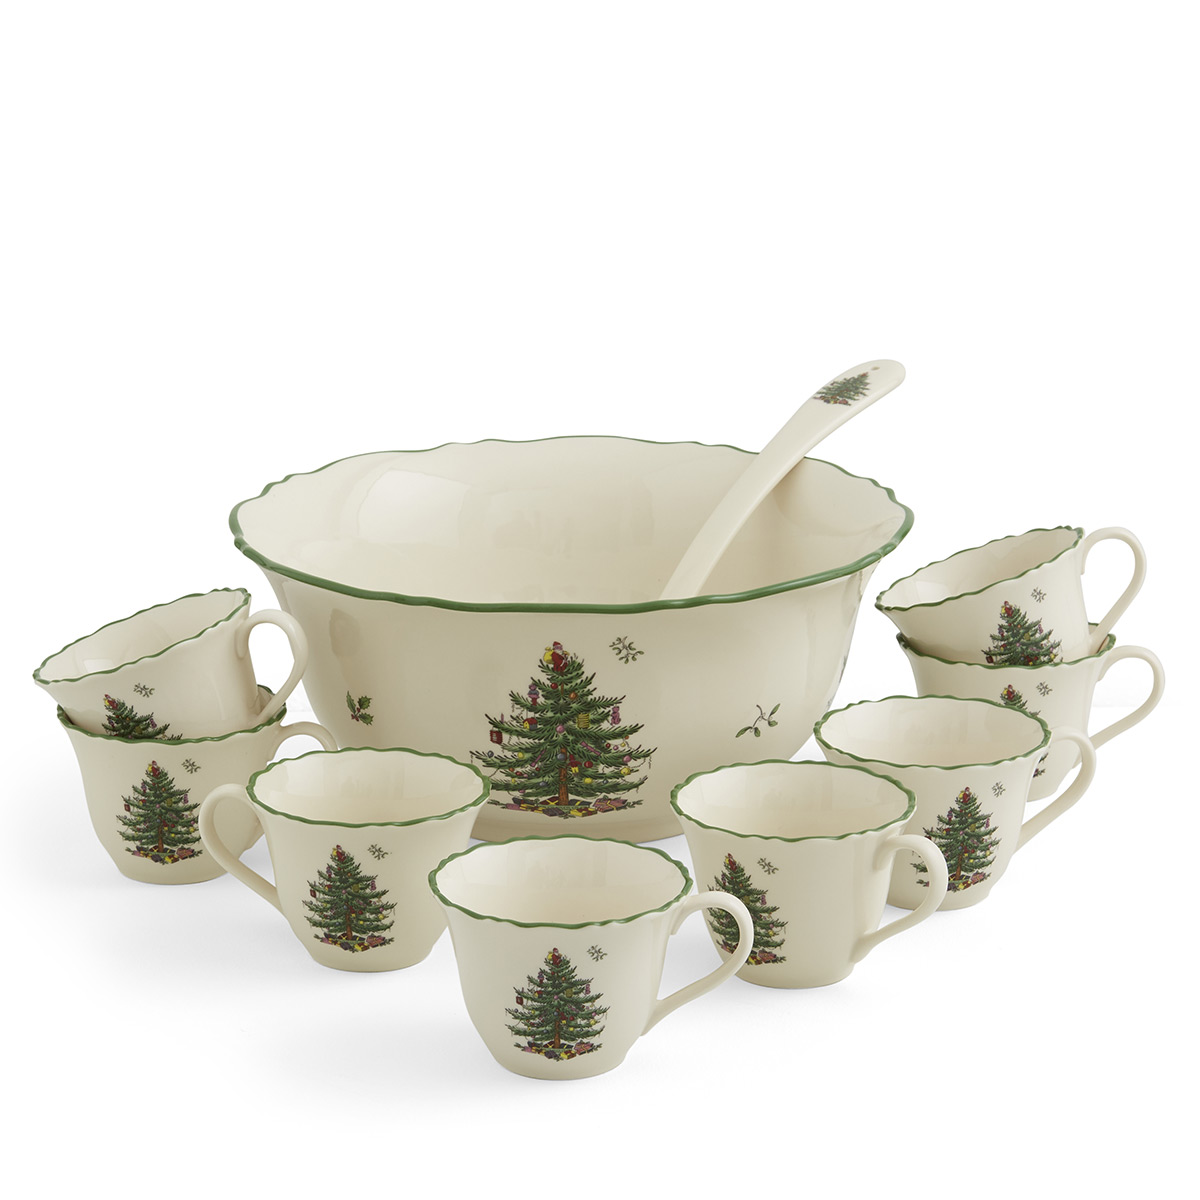 Spode Christmas Tree Serveware 10 Piece Punch Bowl With Cups And Ladle